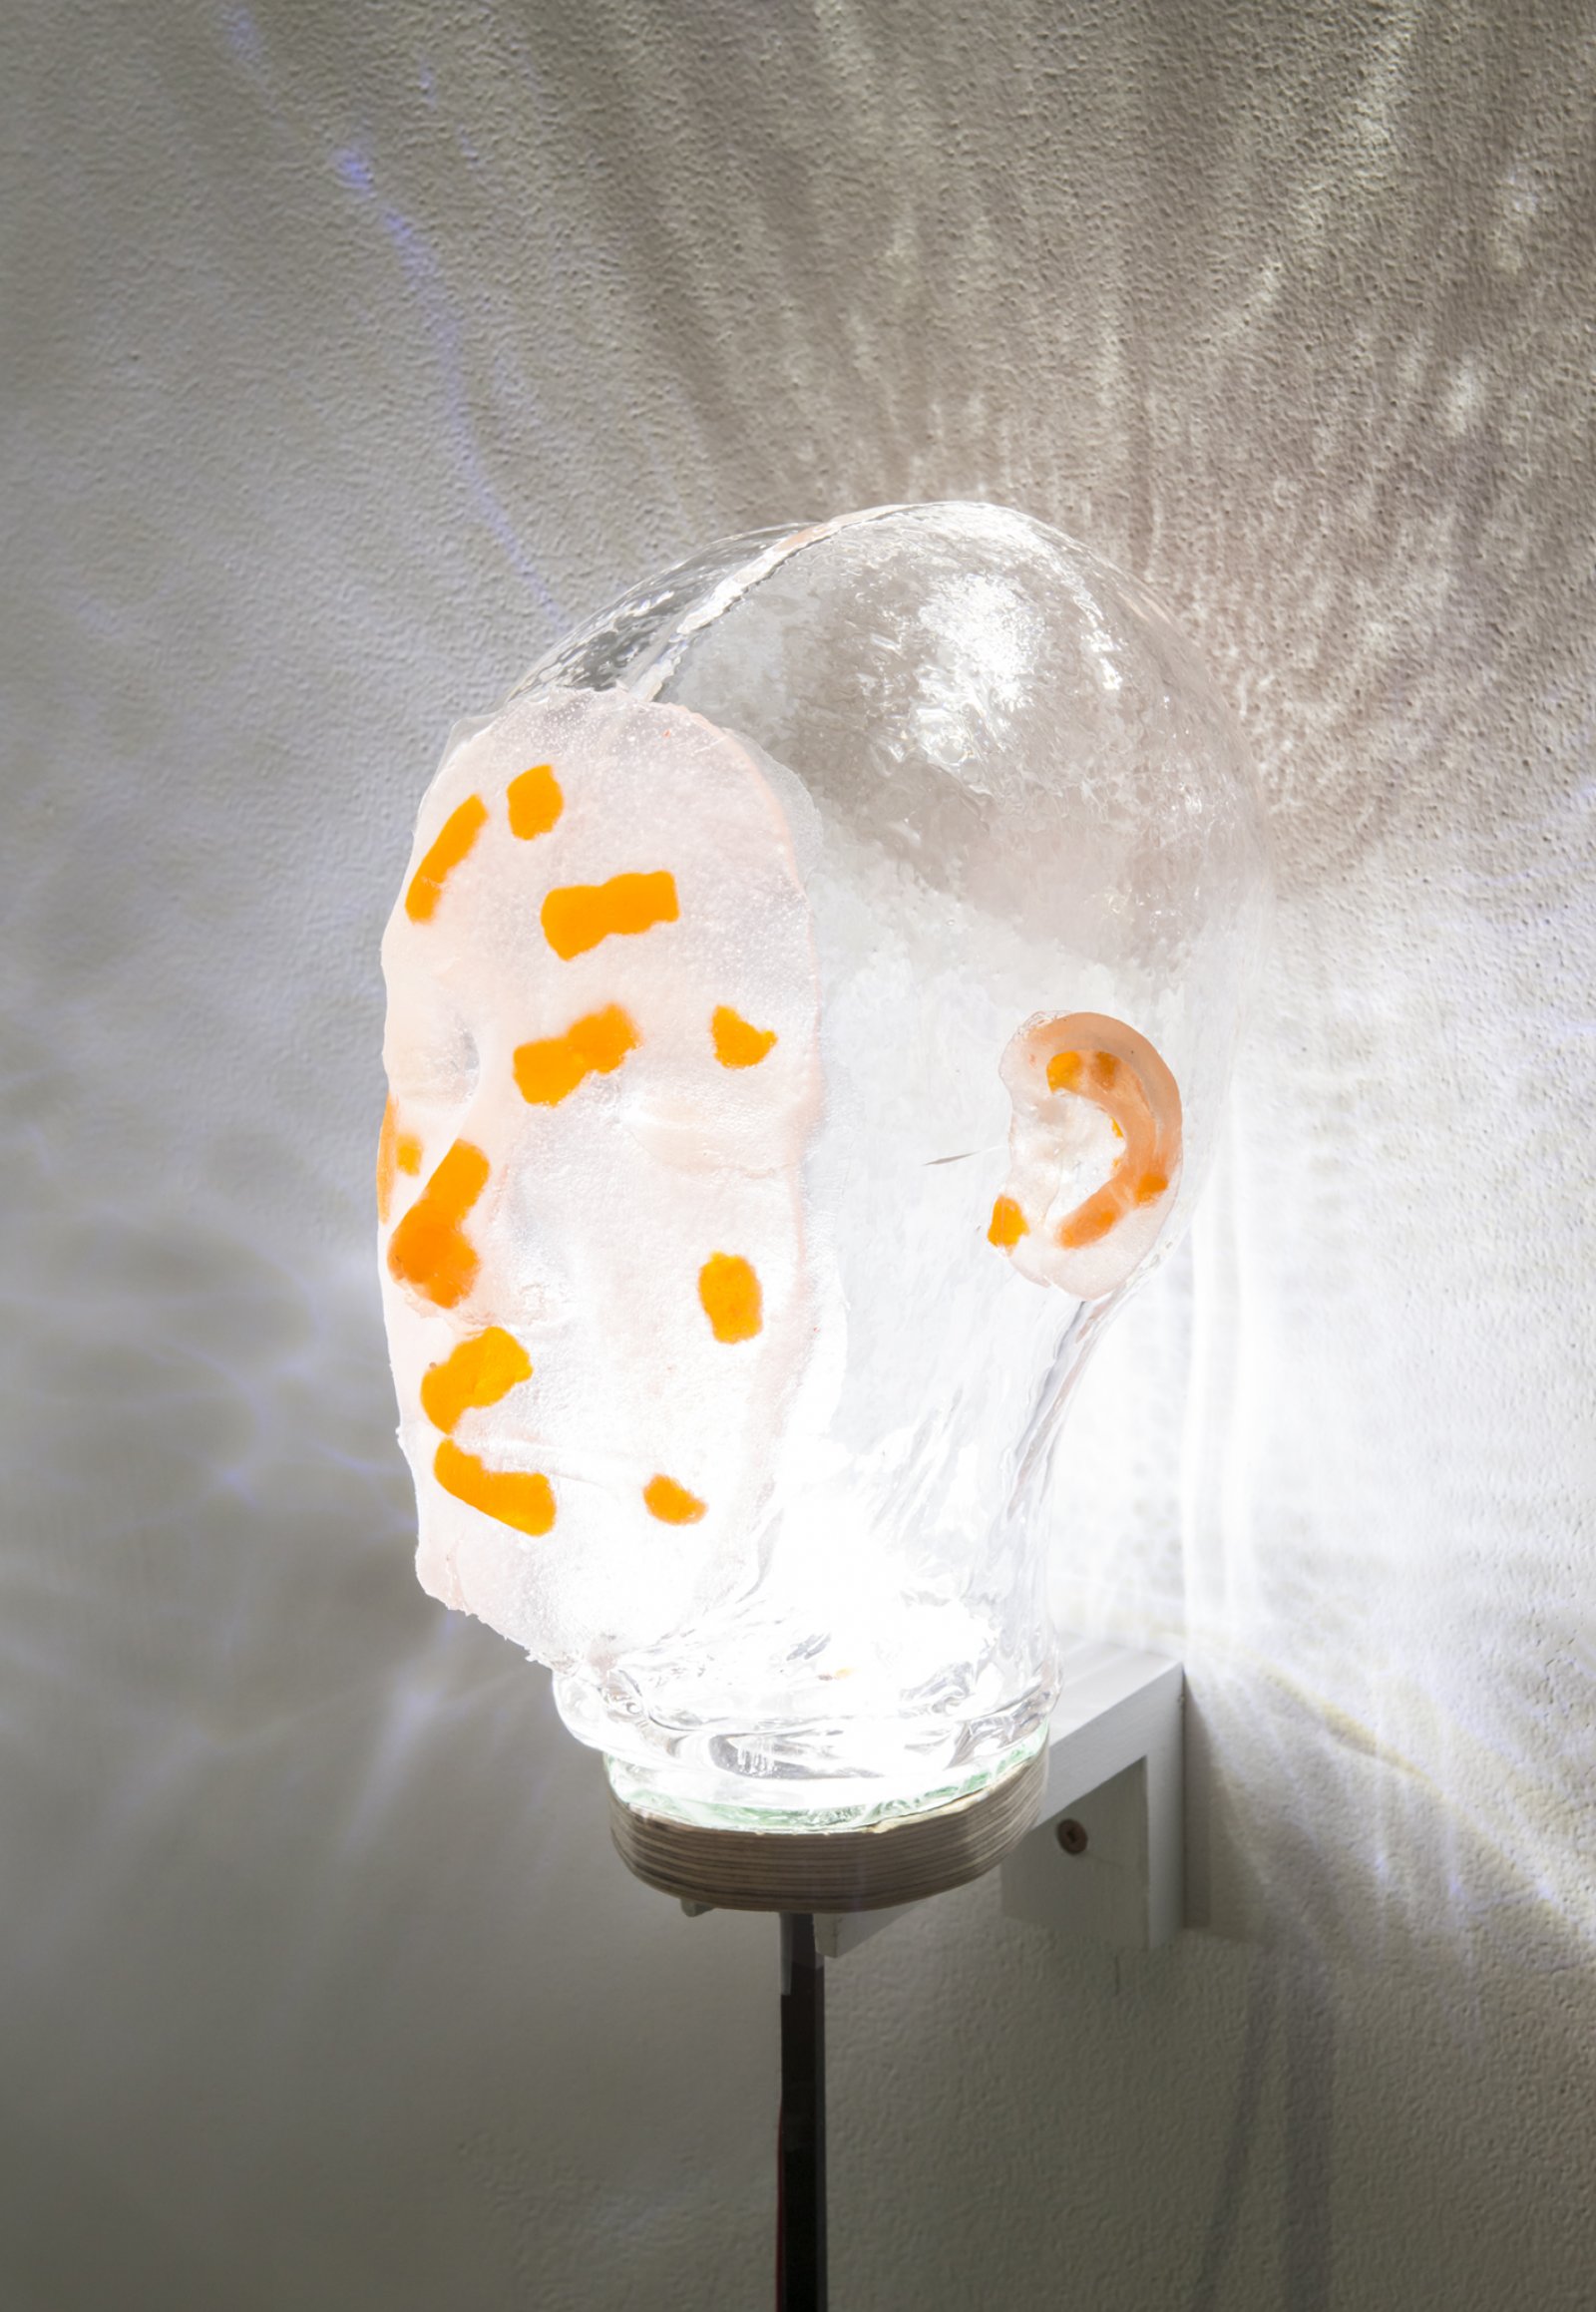 ​Julia Feyrer, Witnesses (detail), 2018, sour kids, iron poker, handblown glass, dyed silicone, LED lights, 39 x 7 x 10 in. (99 x 18 x 25 cm) by Julia Feyrer